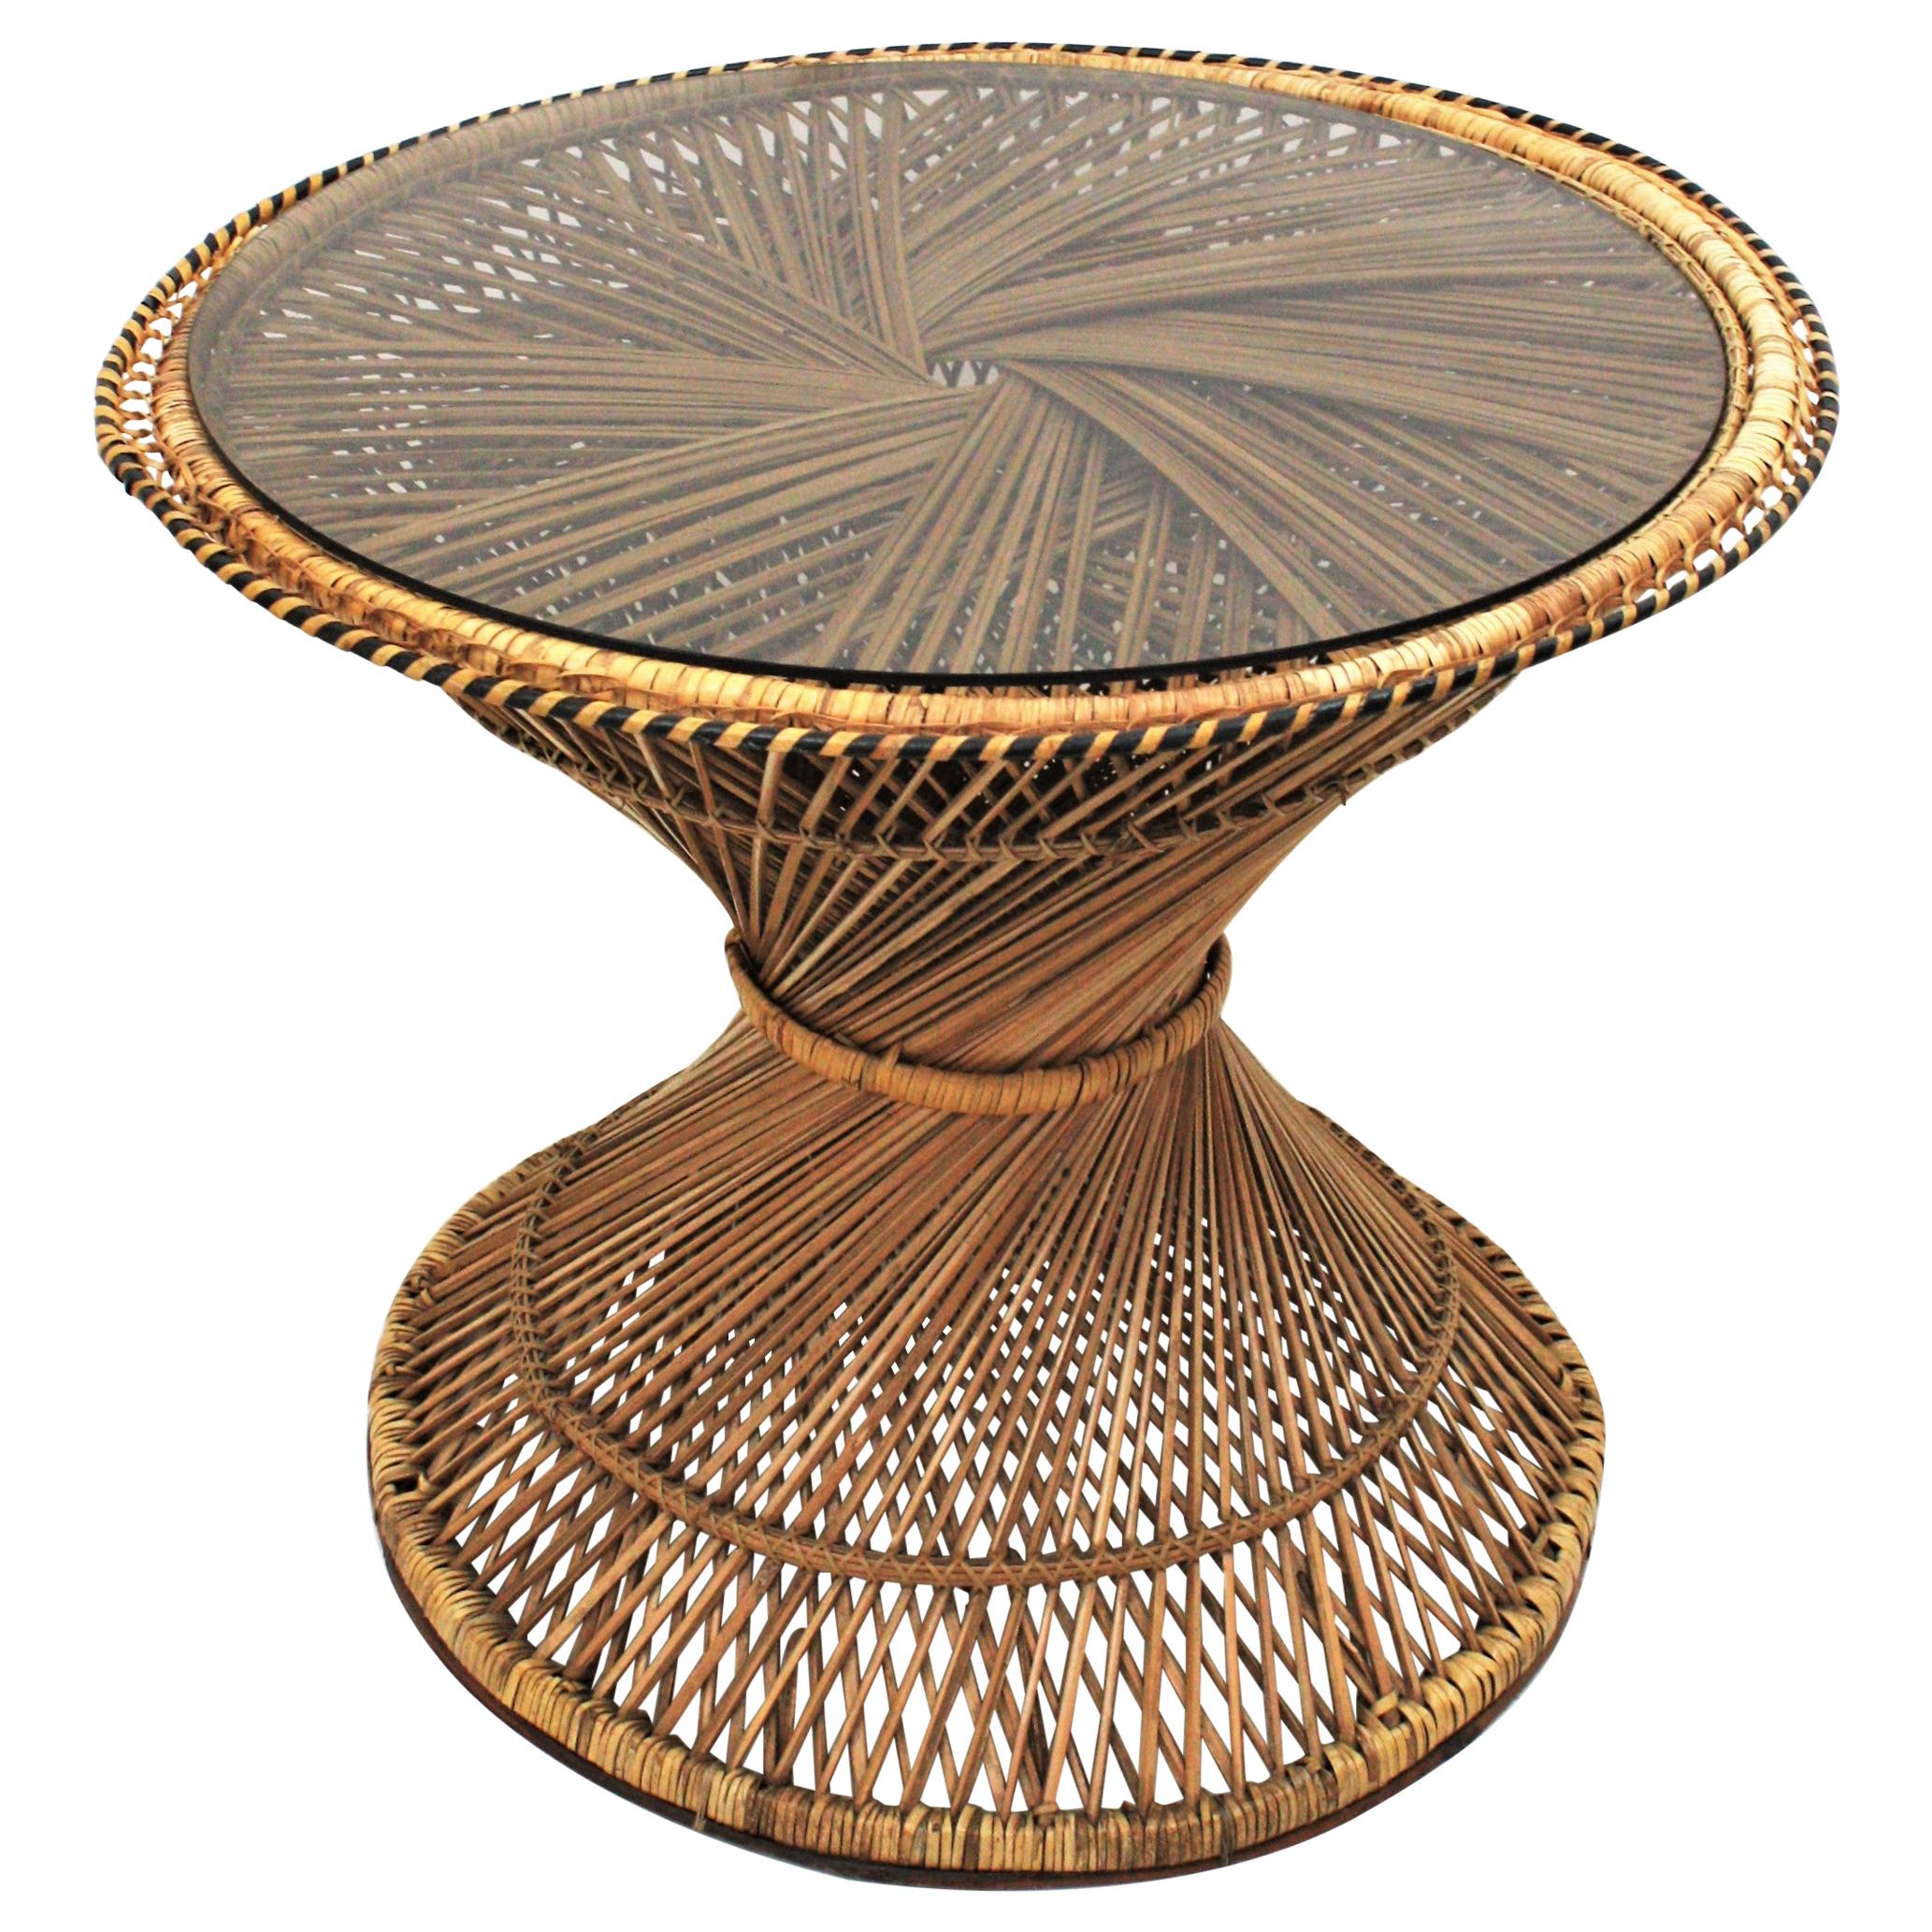 Woven Wicker and Rattan Emmanuelle Peacock Coffee Table, Spain, 1960s